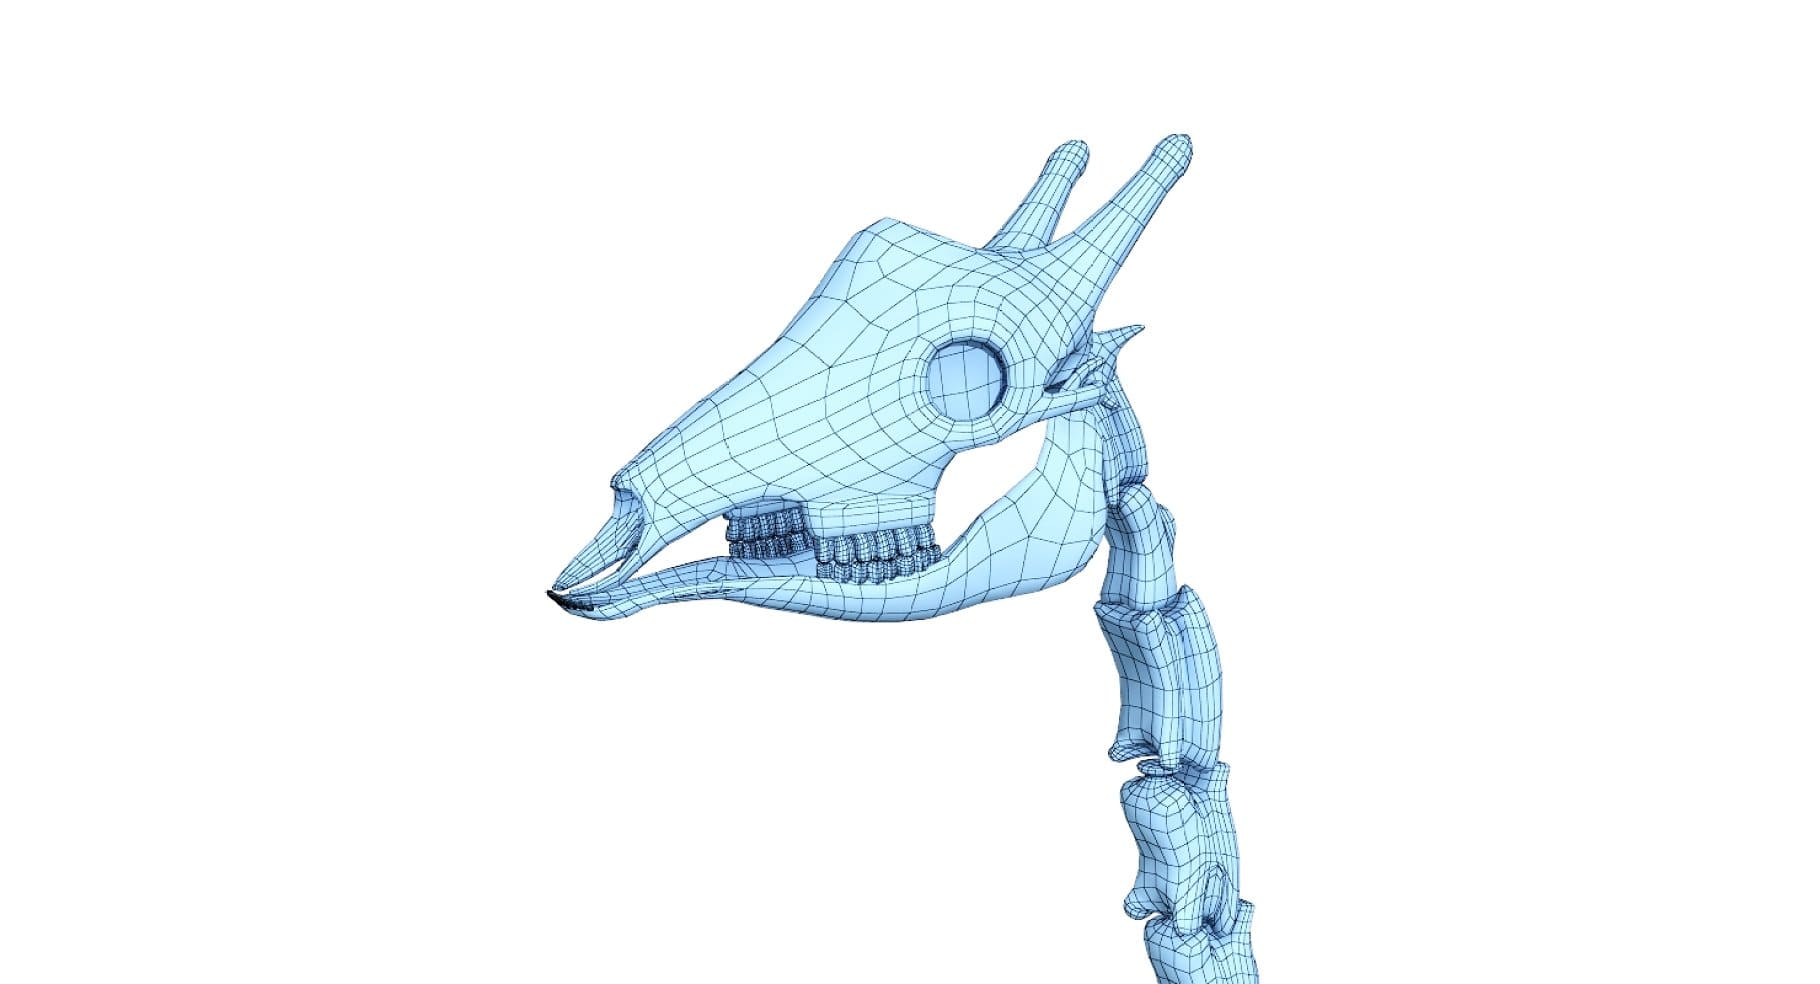 Image of a giraffe skull in the form of a blue 3D model.